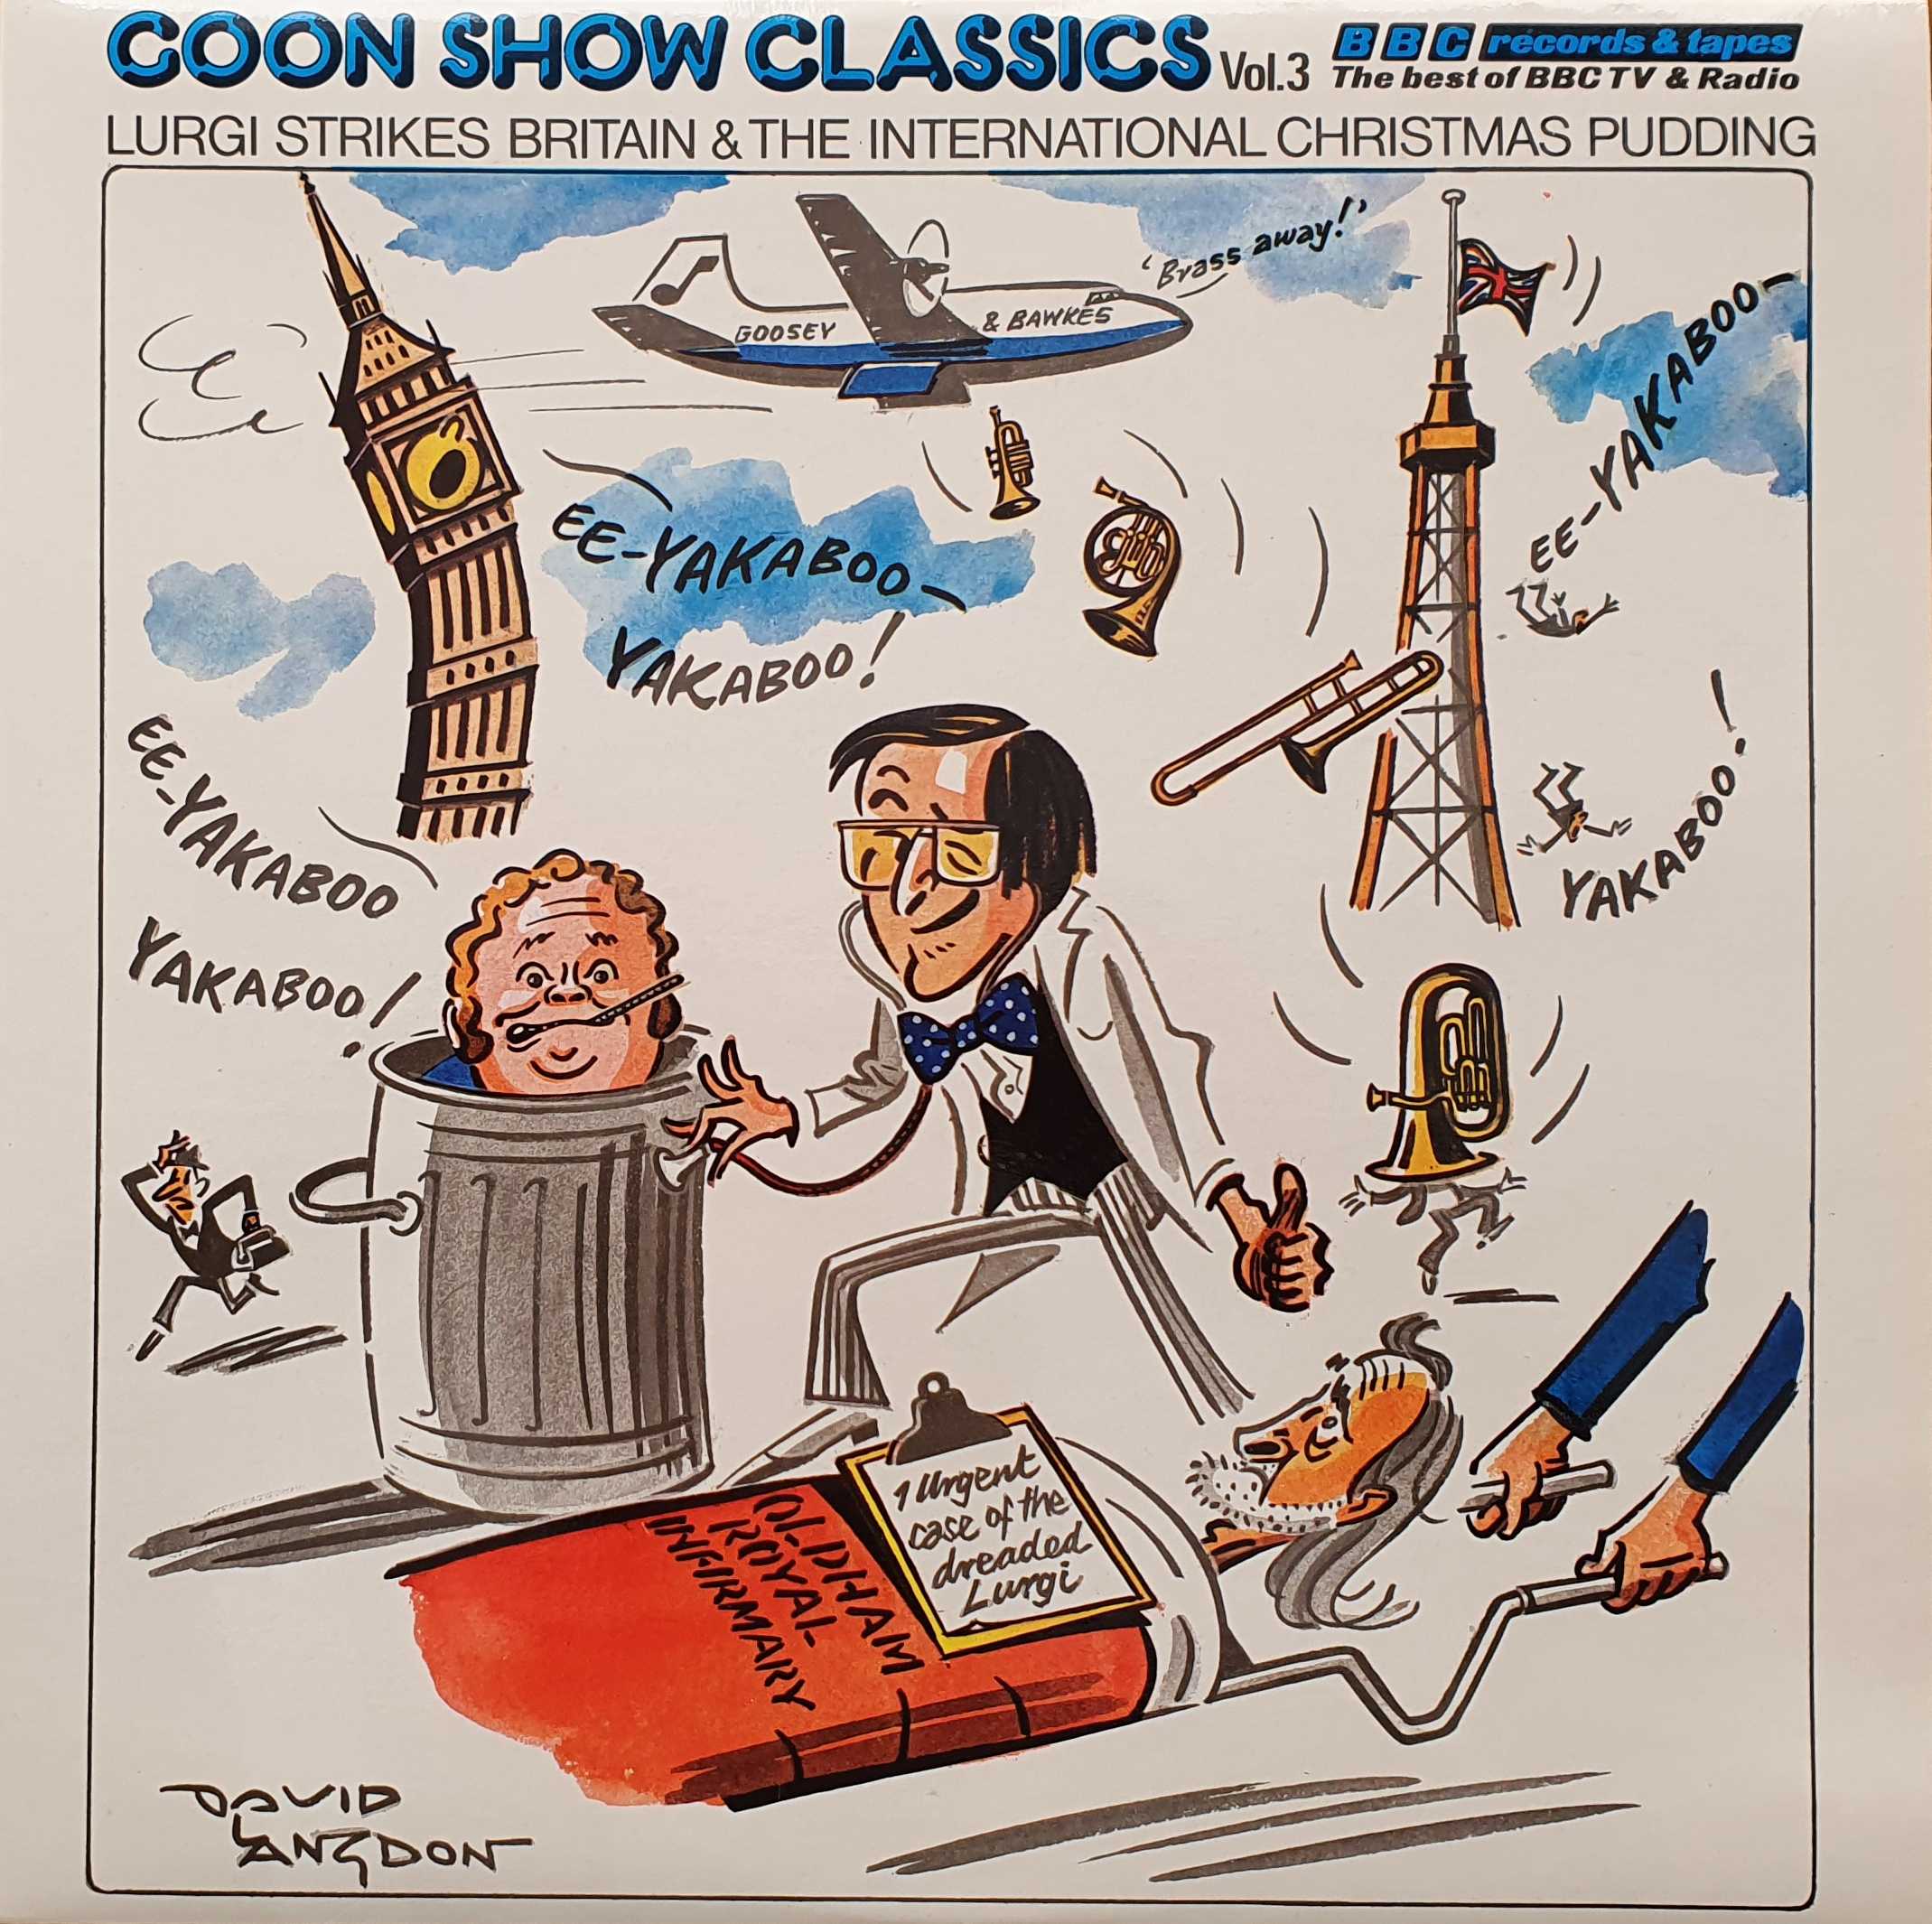 Picture of 2964 045 Goon Show classics vol. 3 (Australian import) by artist The Goon Show from the BBC albums - Records and Tapes library